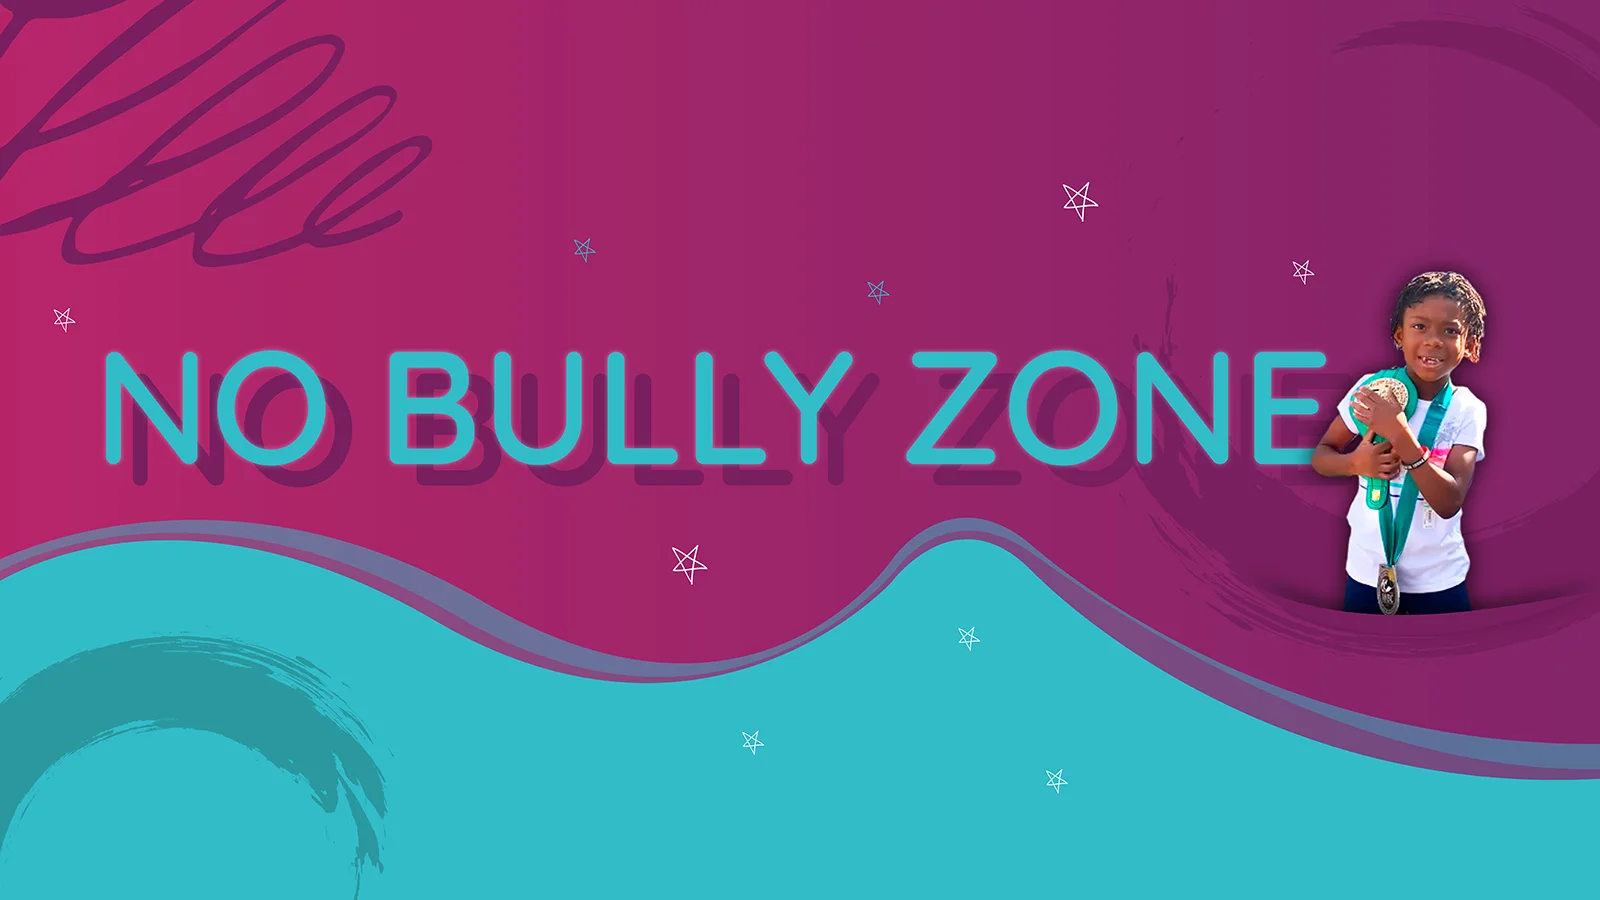 ‘No Bully Zone’ Campaign: Spreading Kindness Against Bullying